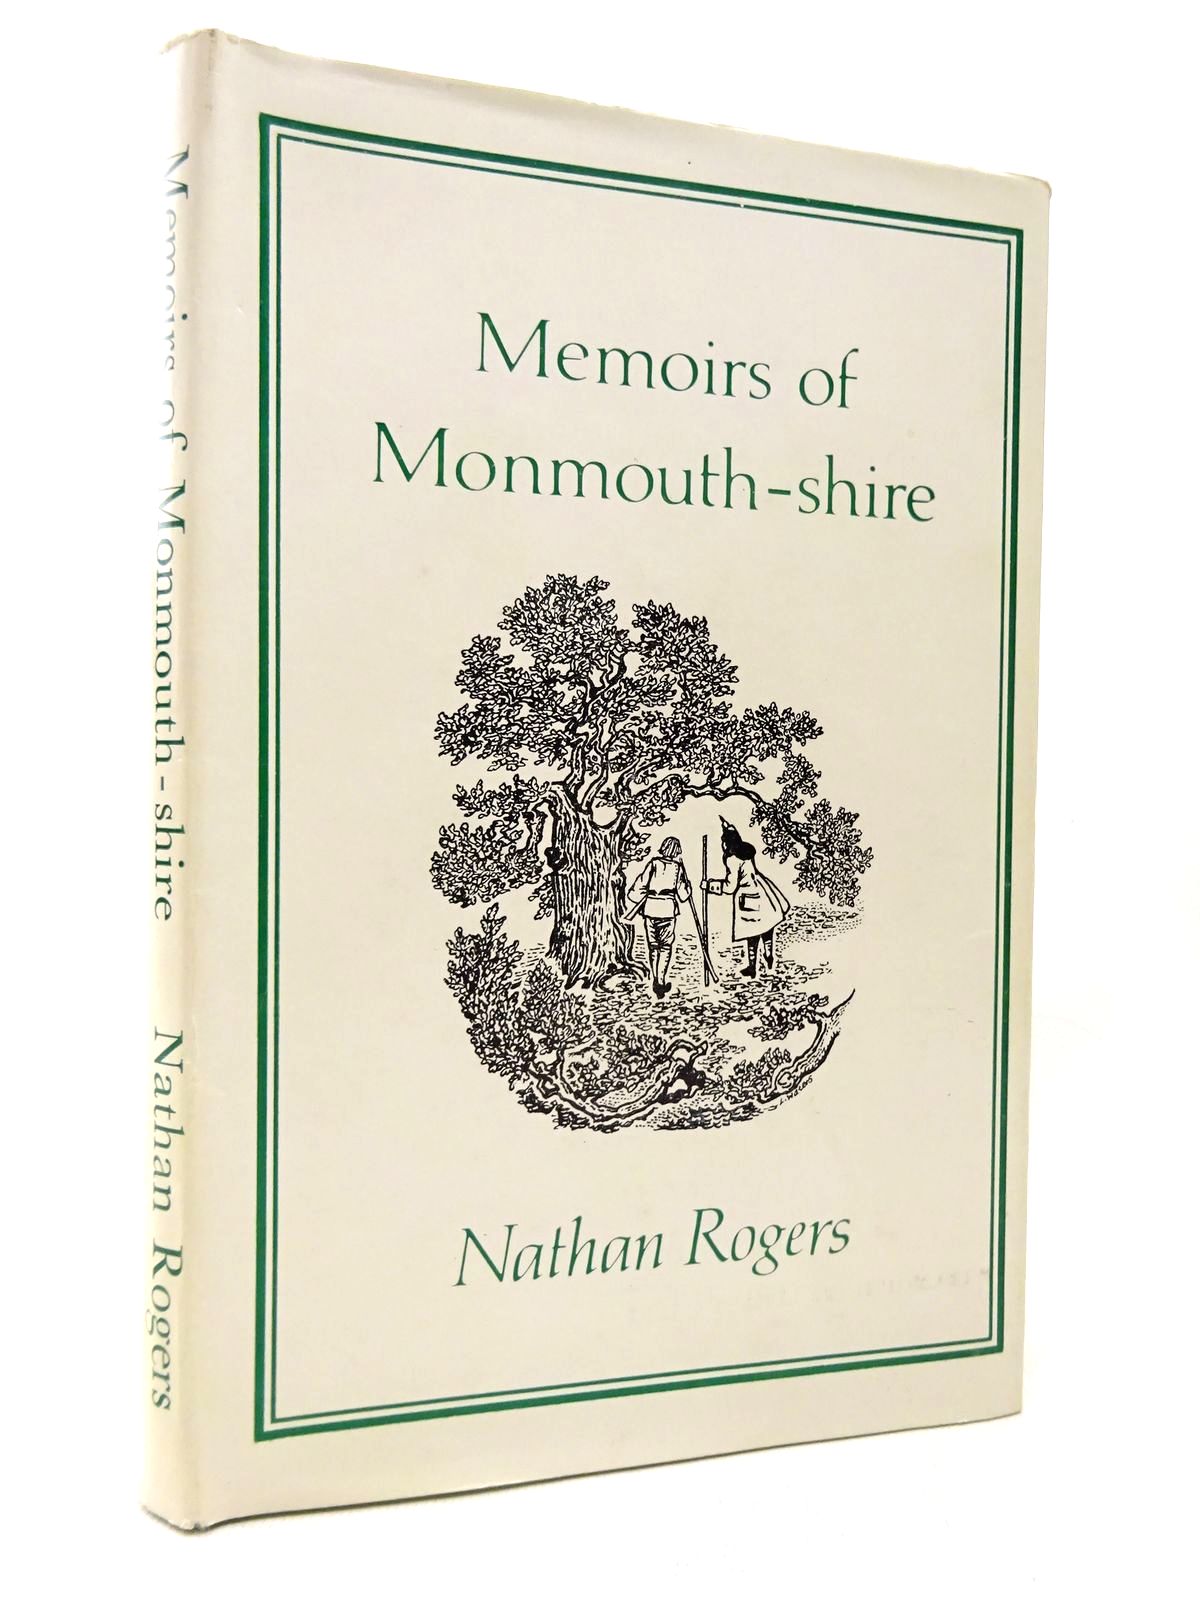 Photo of MEMOIRS OF MONMOUTH-SHIRE 1708 written by Rogers, Nathan illustrated by Waters, Linda published by Moss Rose Press (STOCK CODE: 1815780)  for sale by Stella & Rose's Books